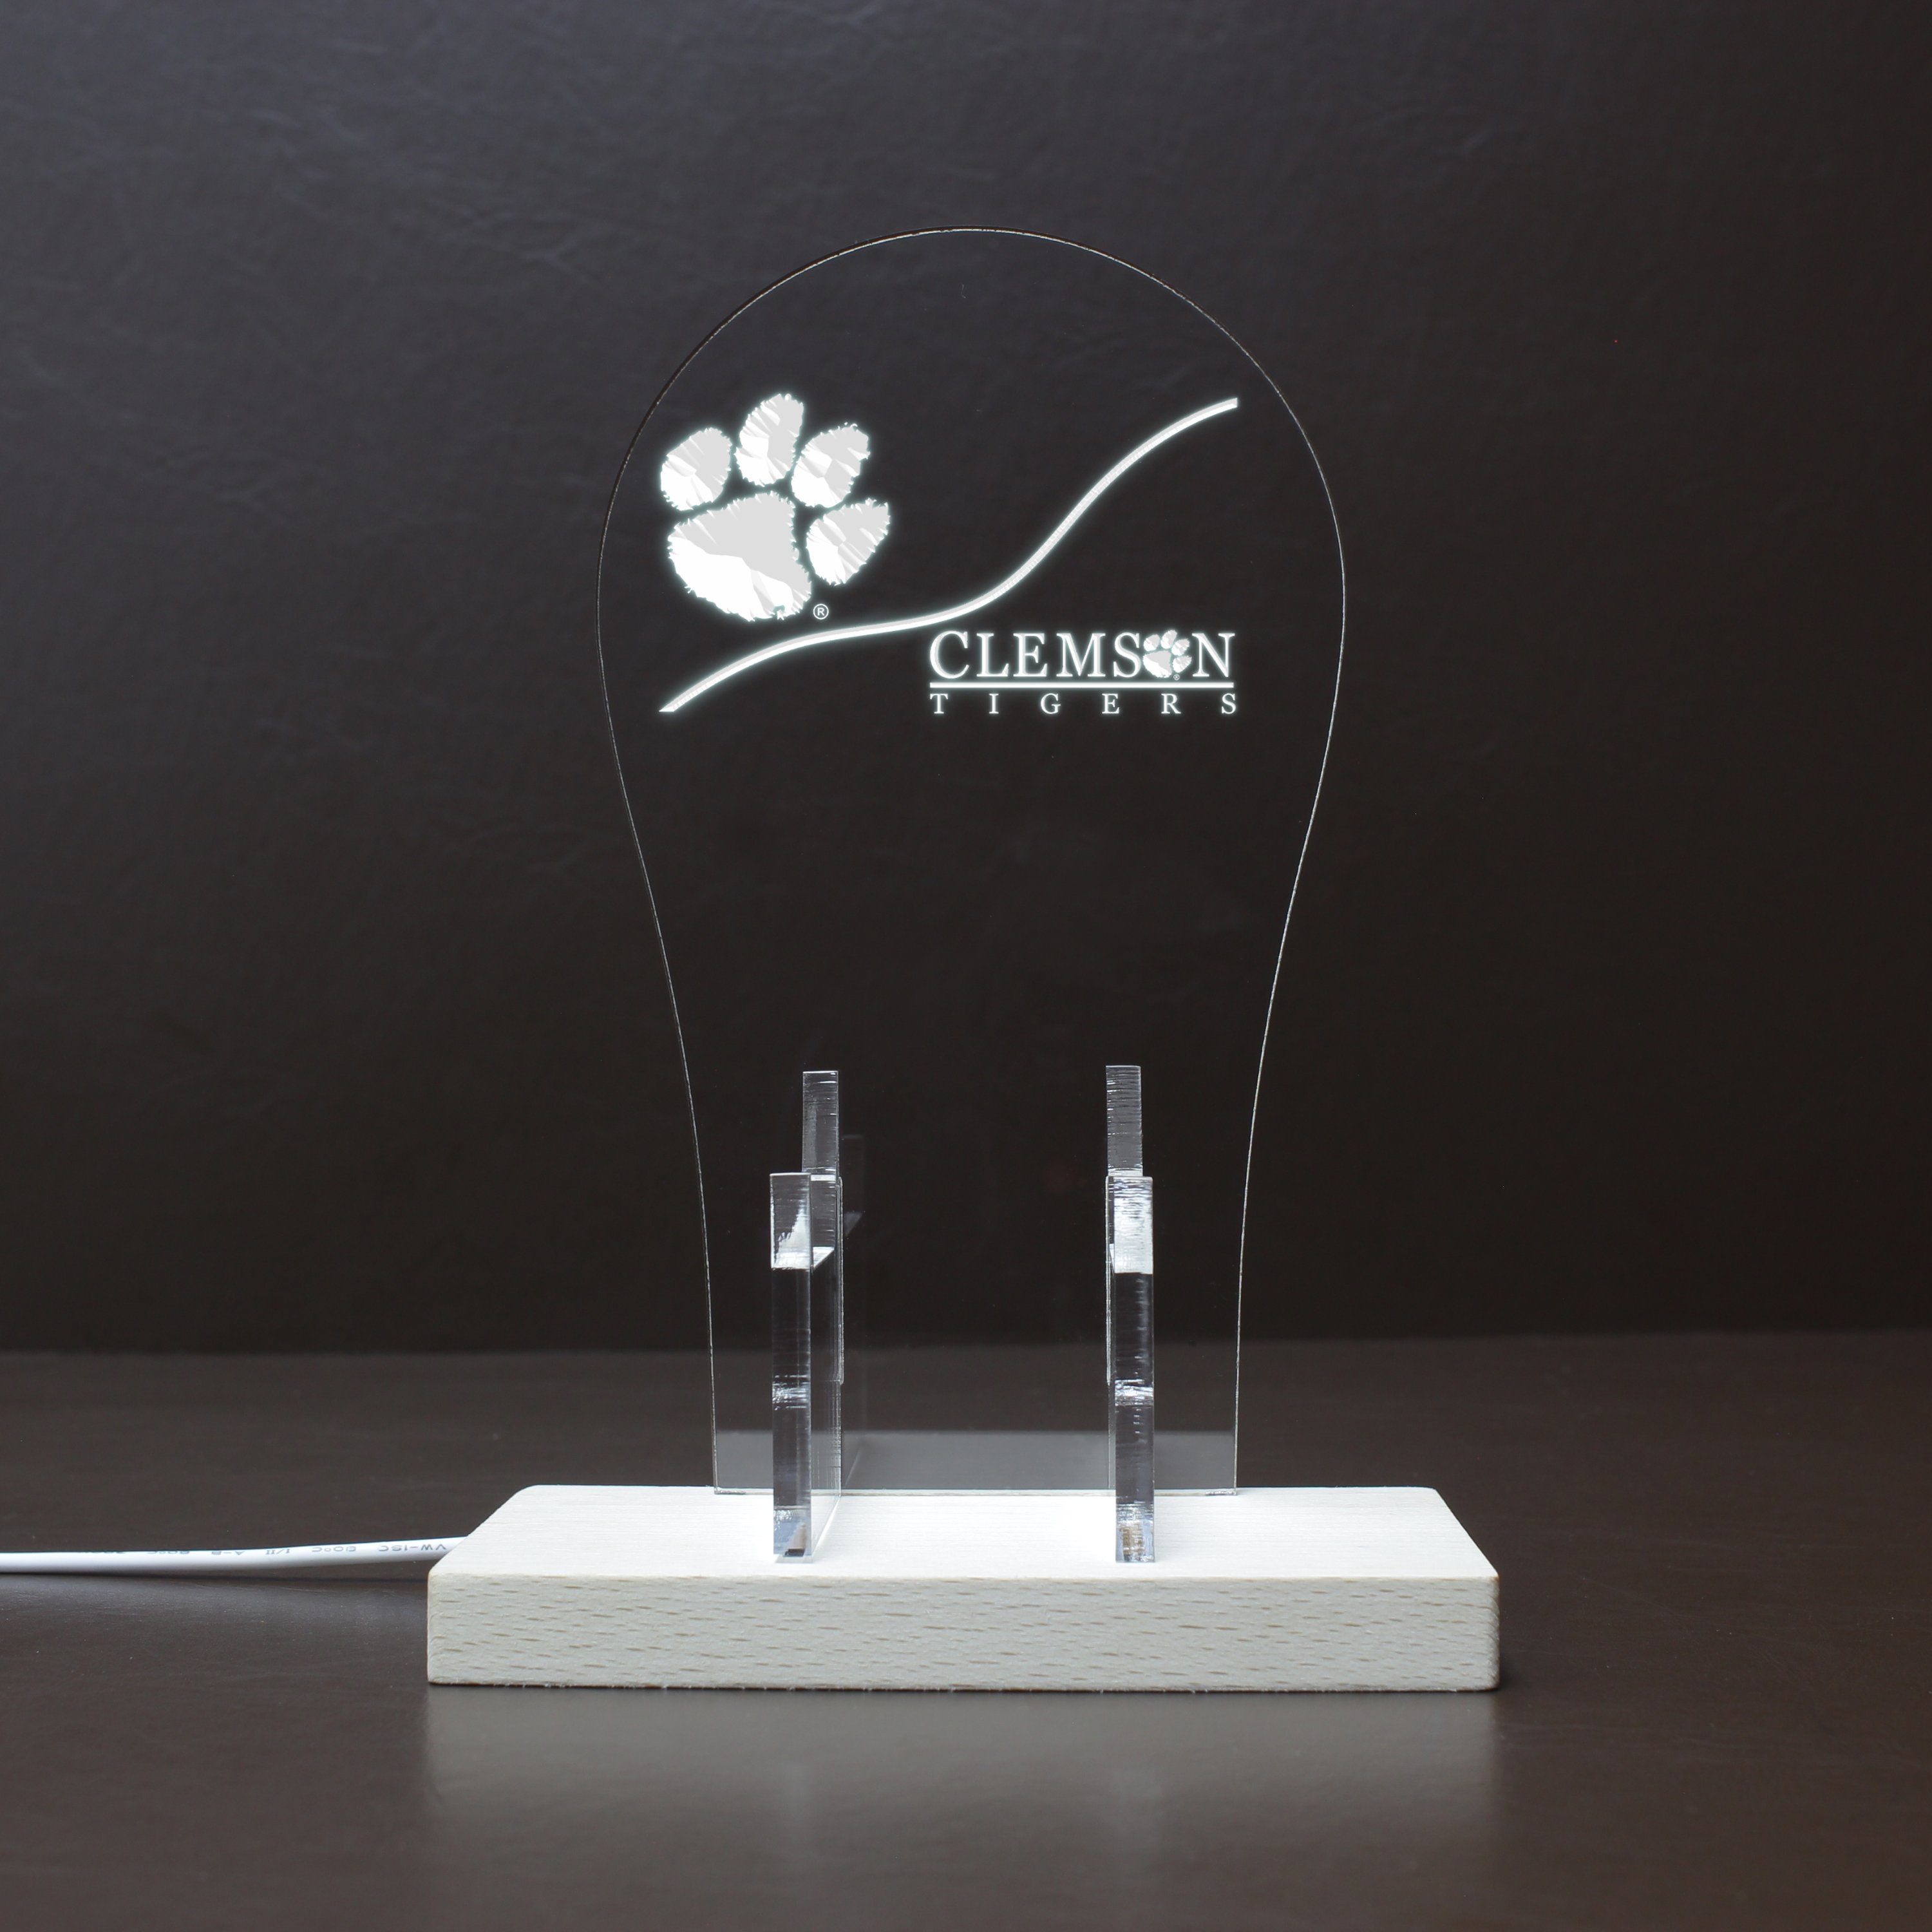 Clemson Tigers RGB LED Gaming Headset Controller Stand